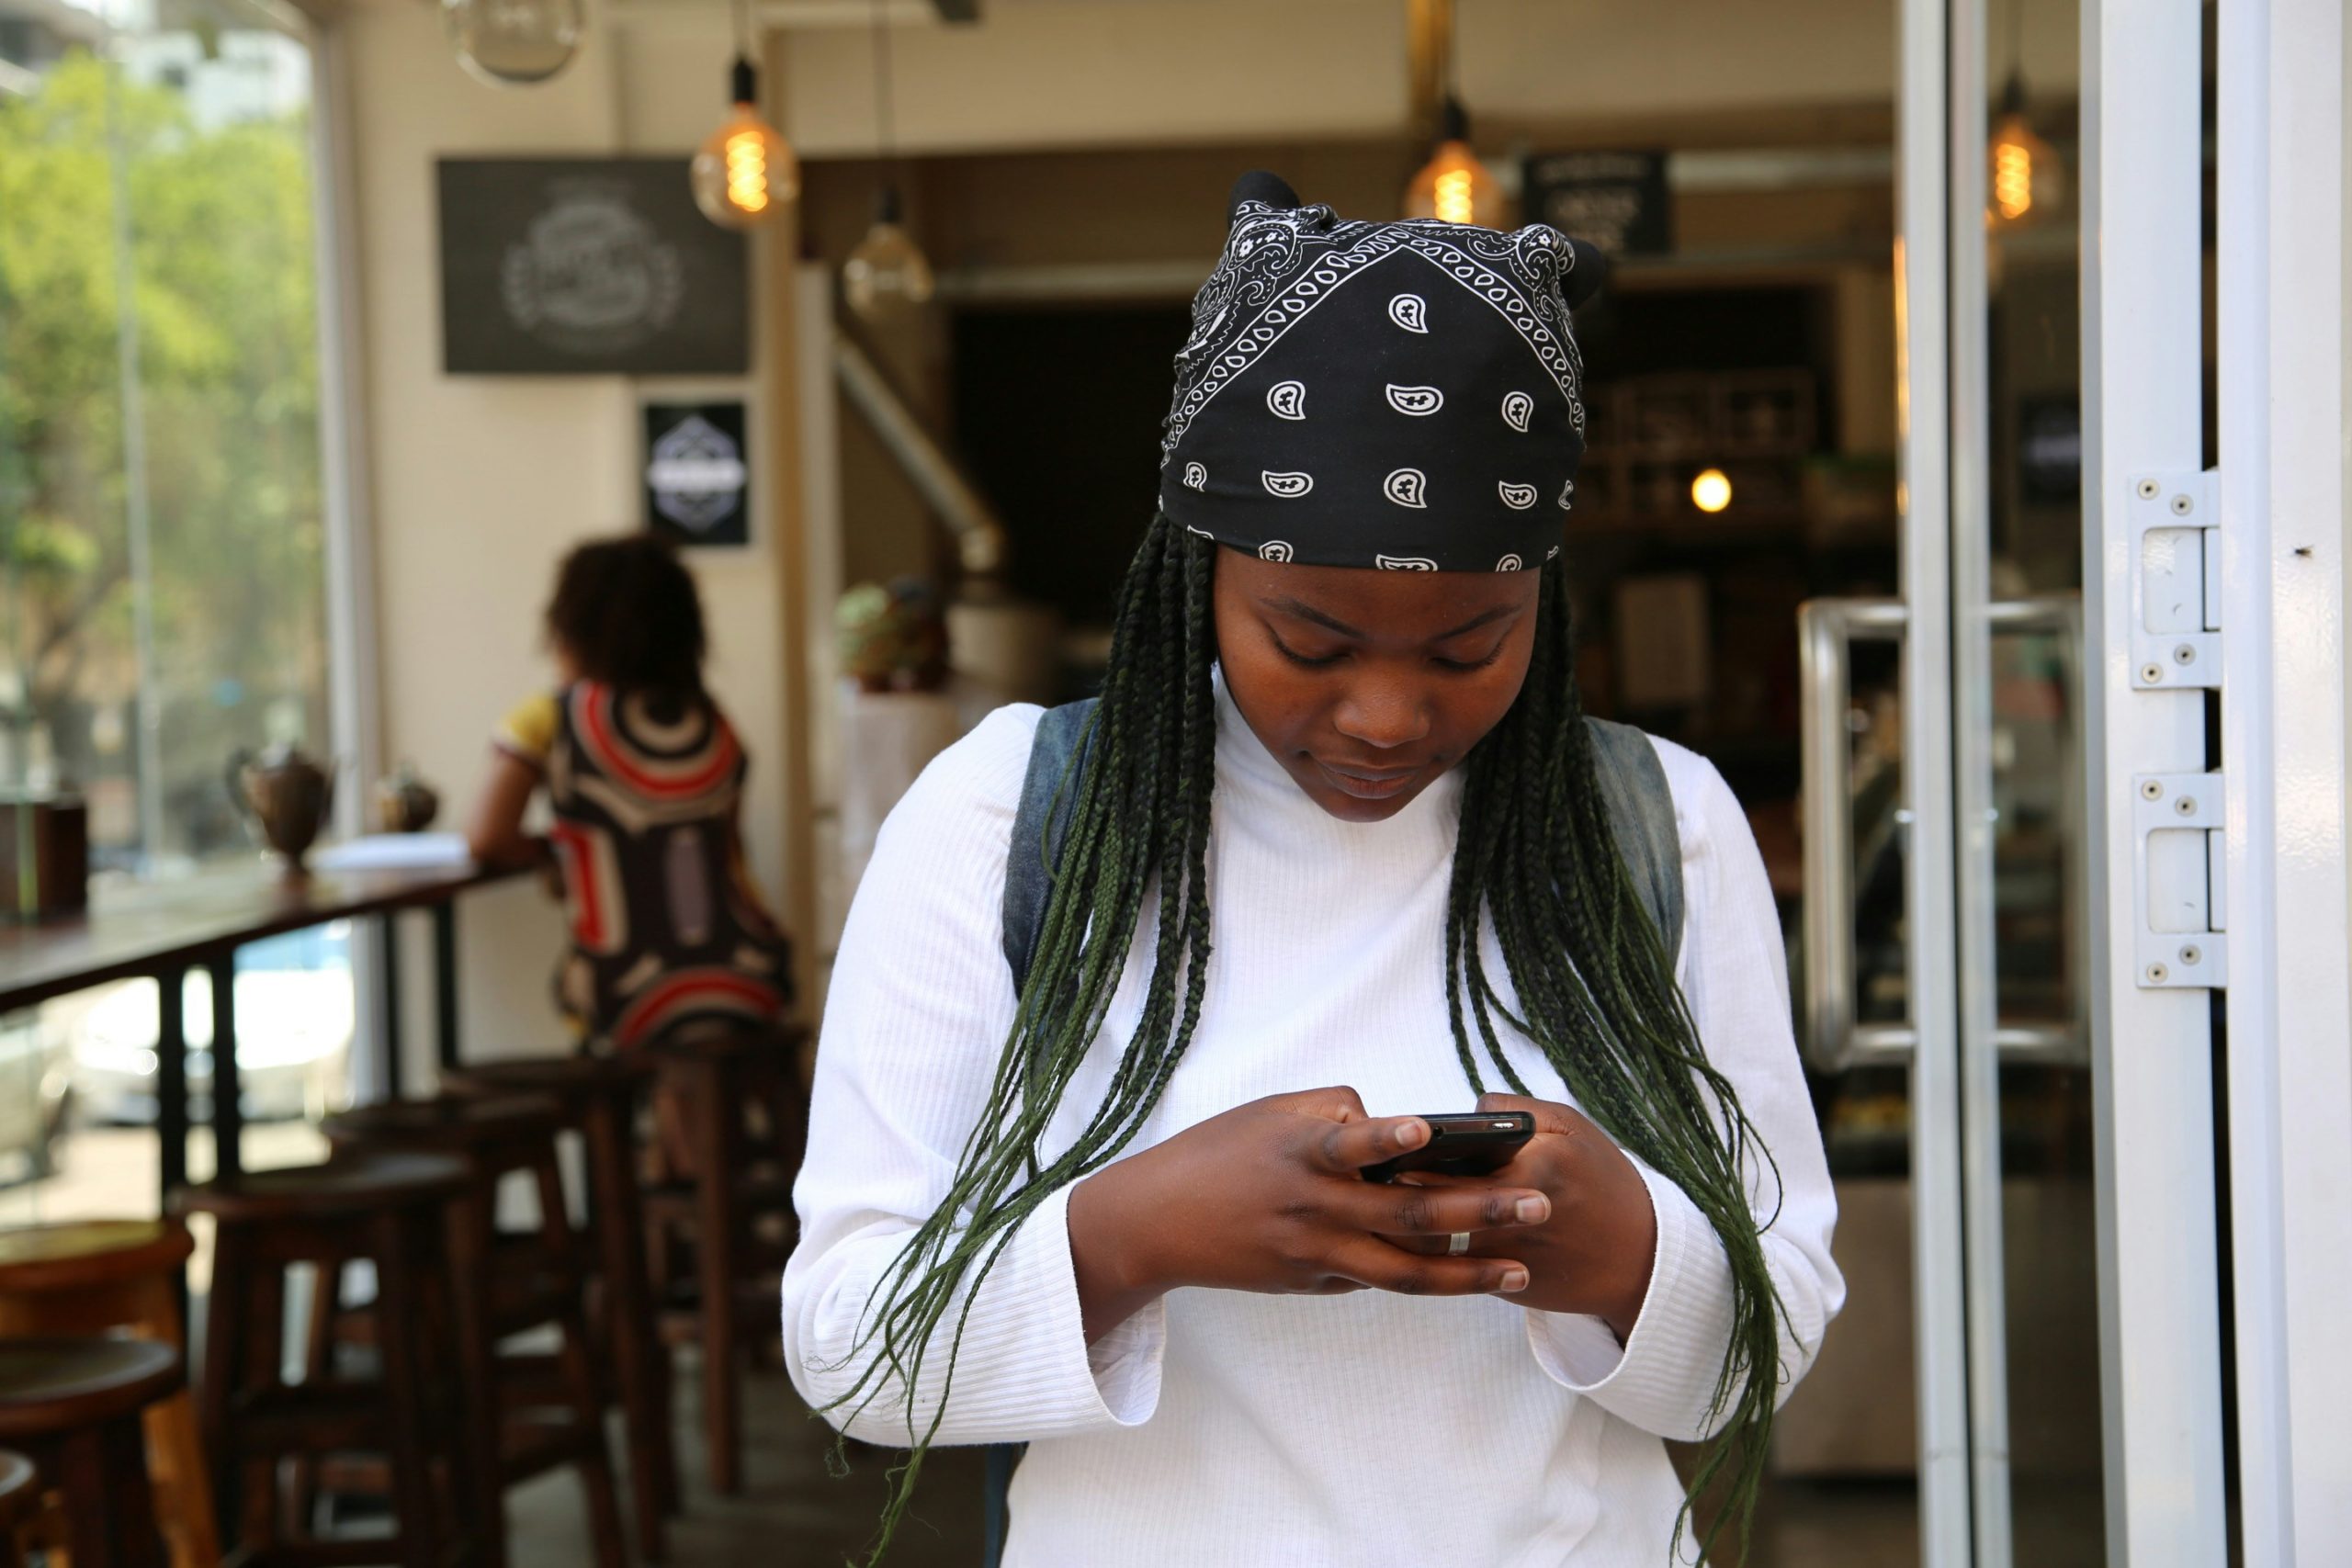 women looking down texting leaving a cafe with a bandana in her hair